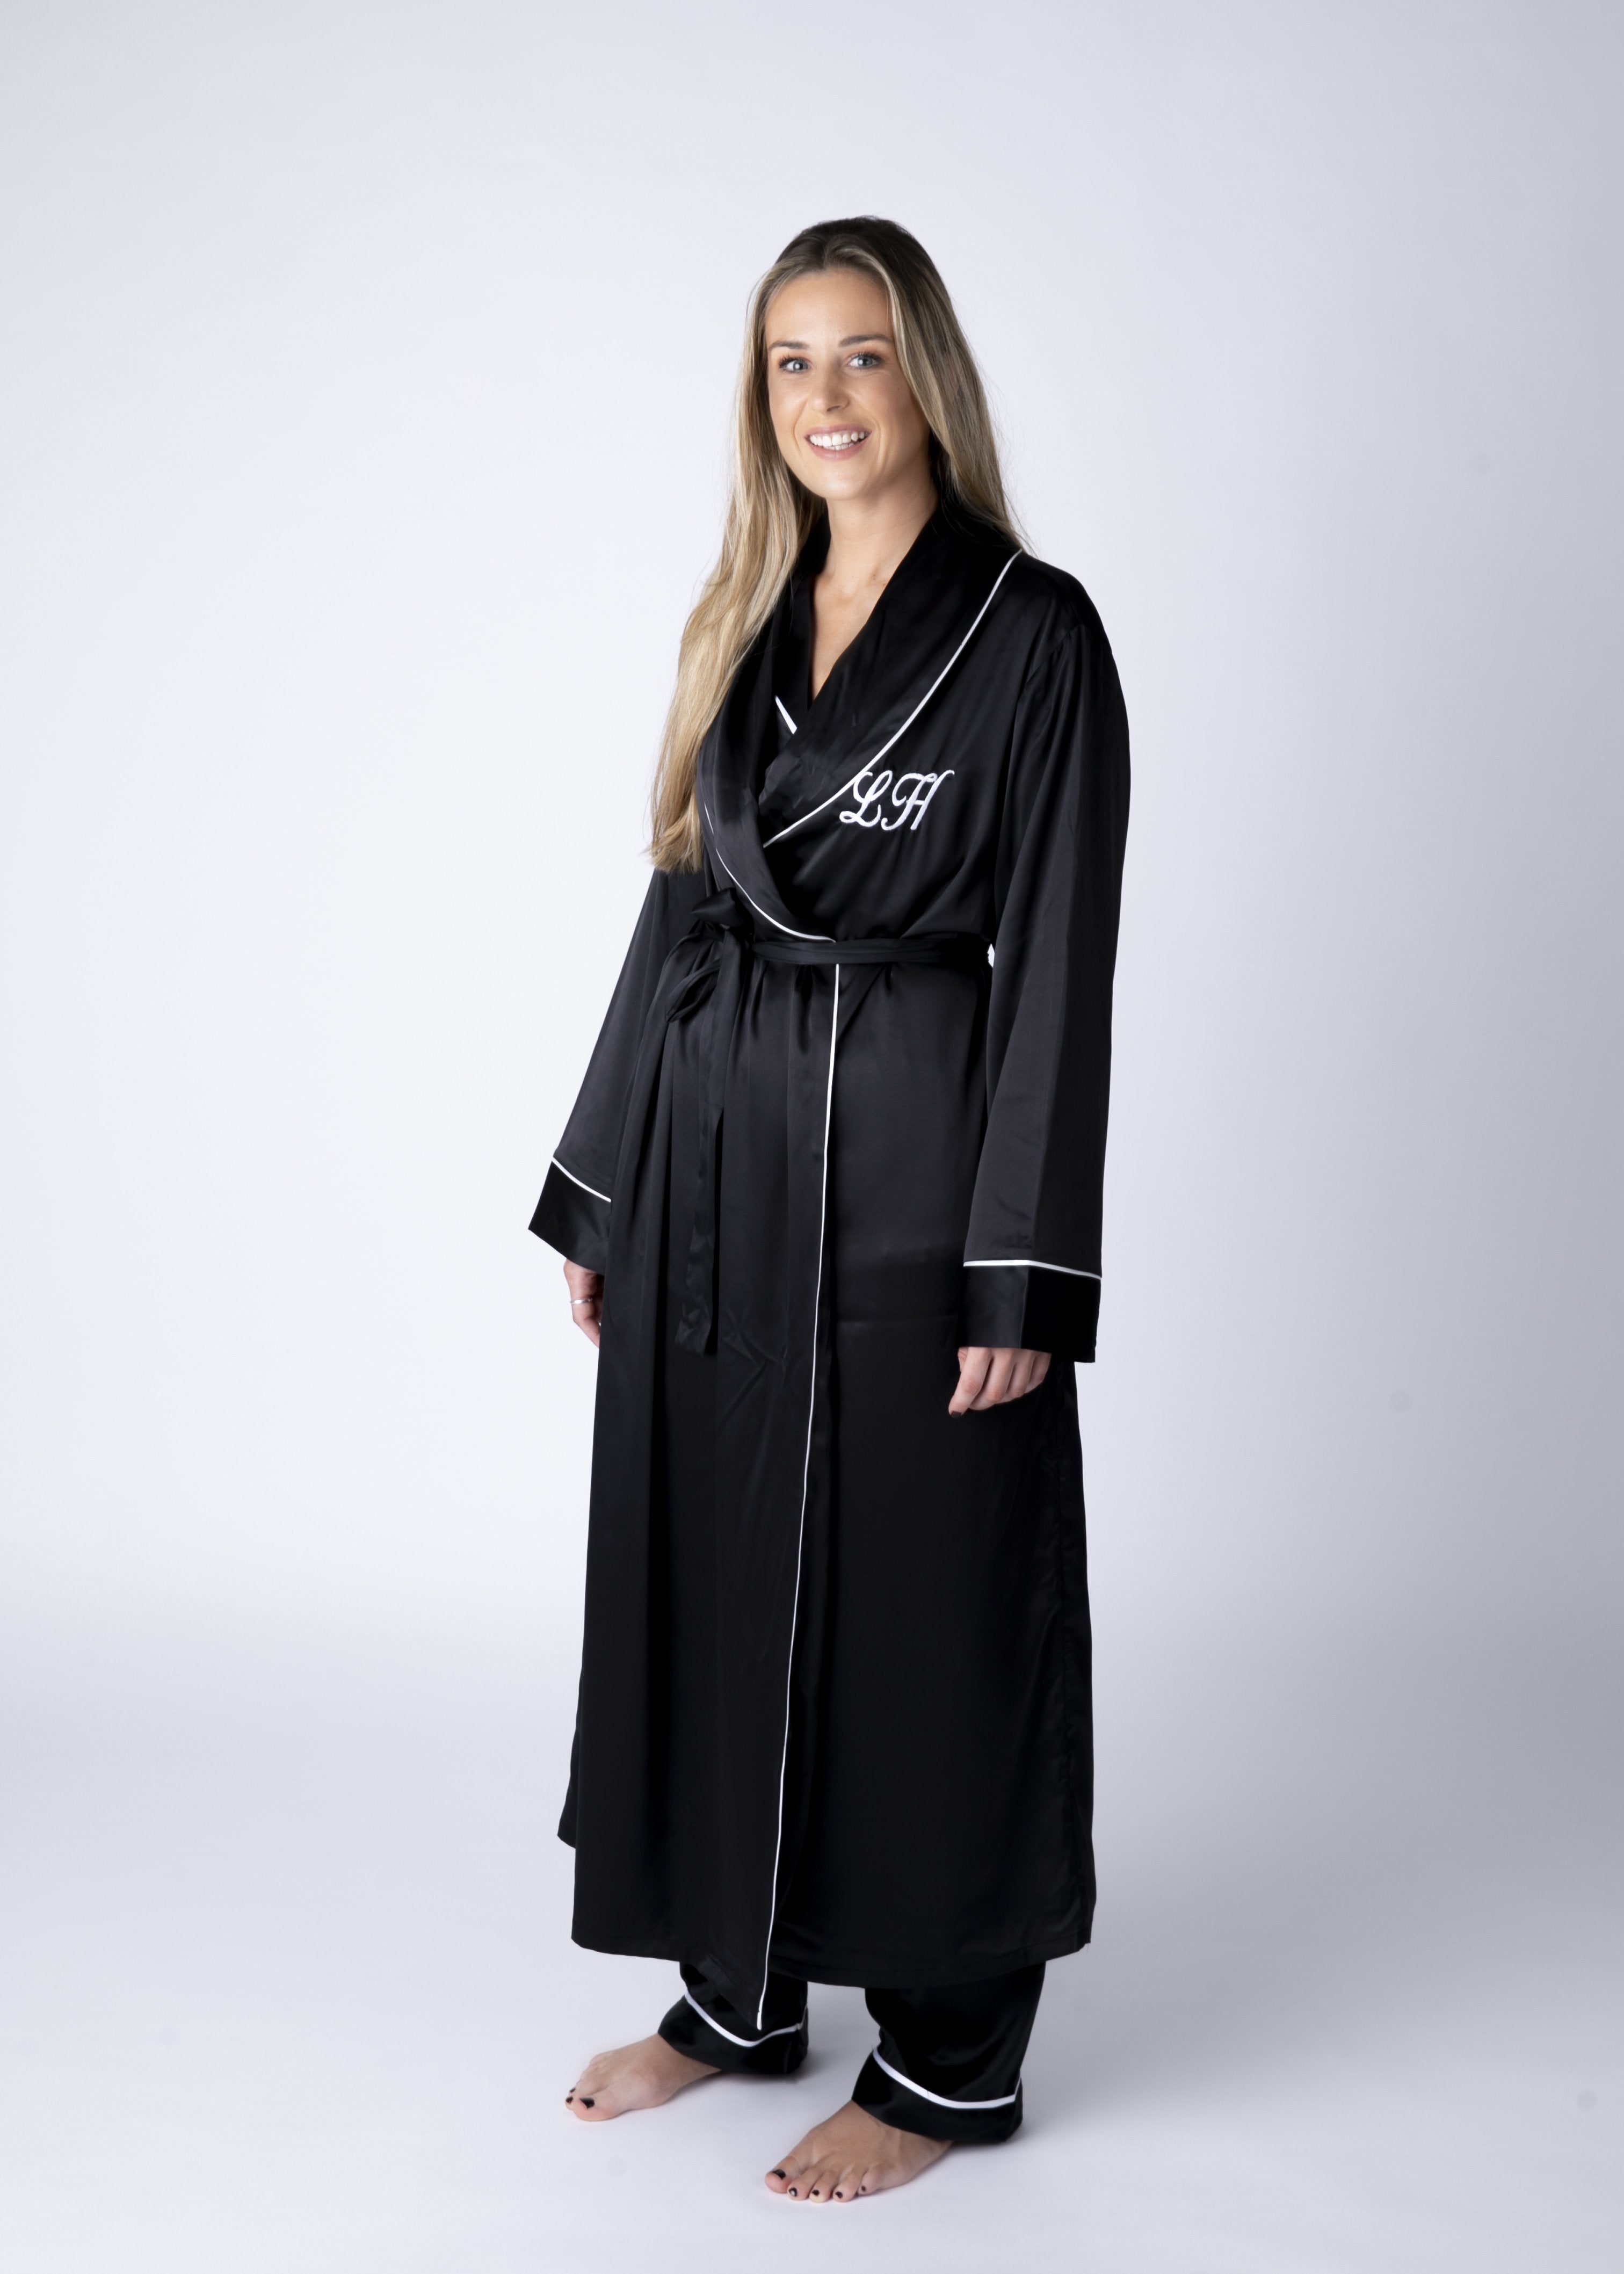 Long Luxurious Silky feel full lenght black satin robe with piping with Matching Pyjamas with chocolates, champagne, candle all presented in a gift box